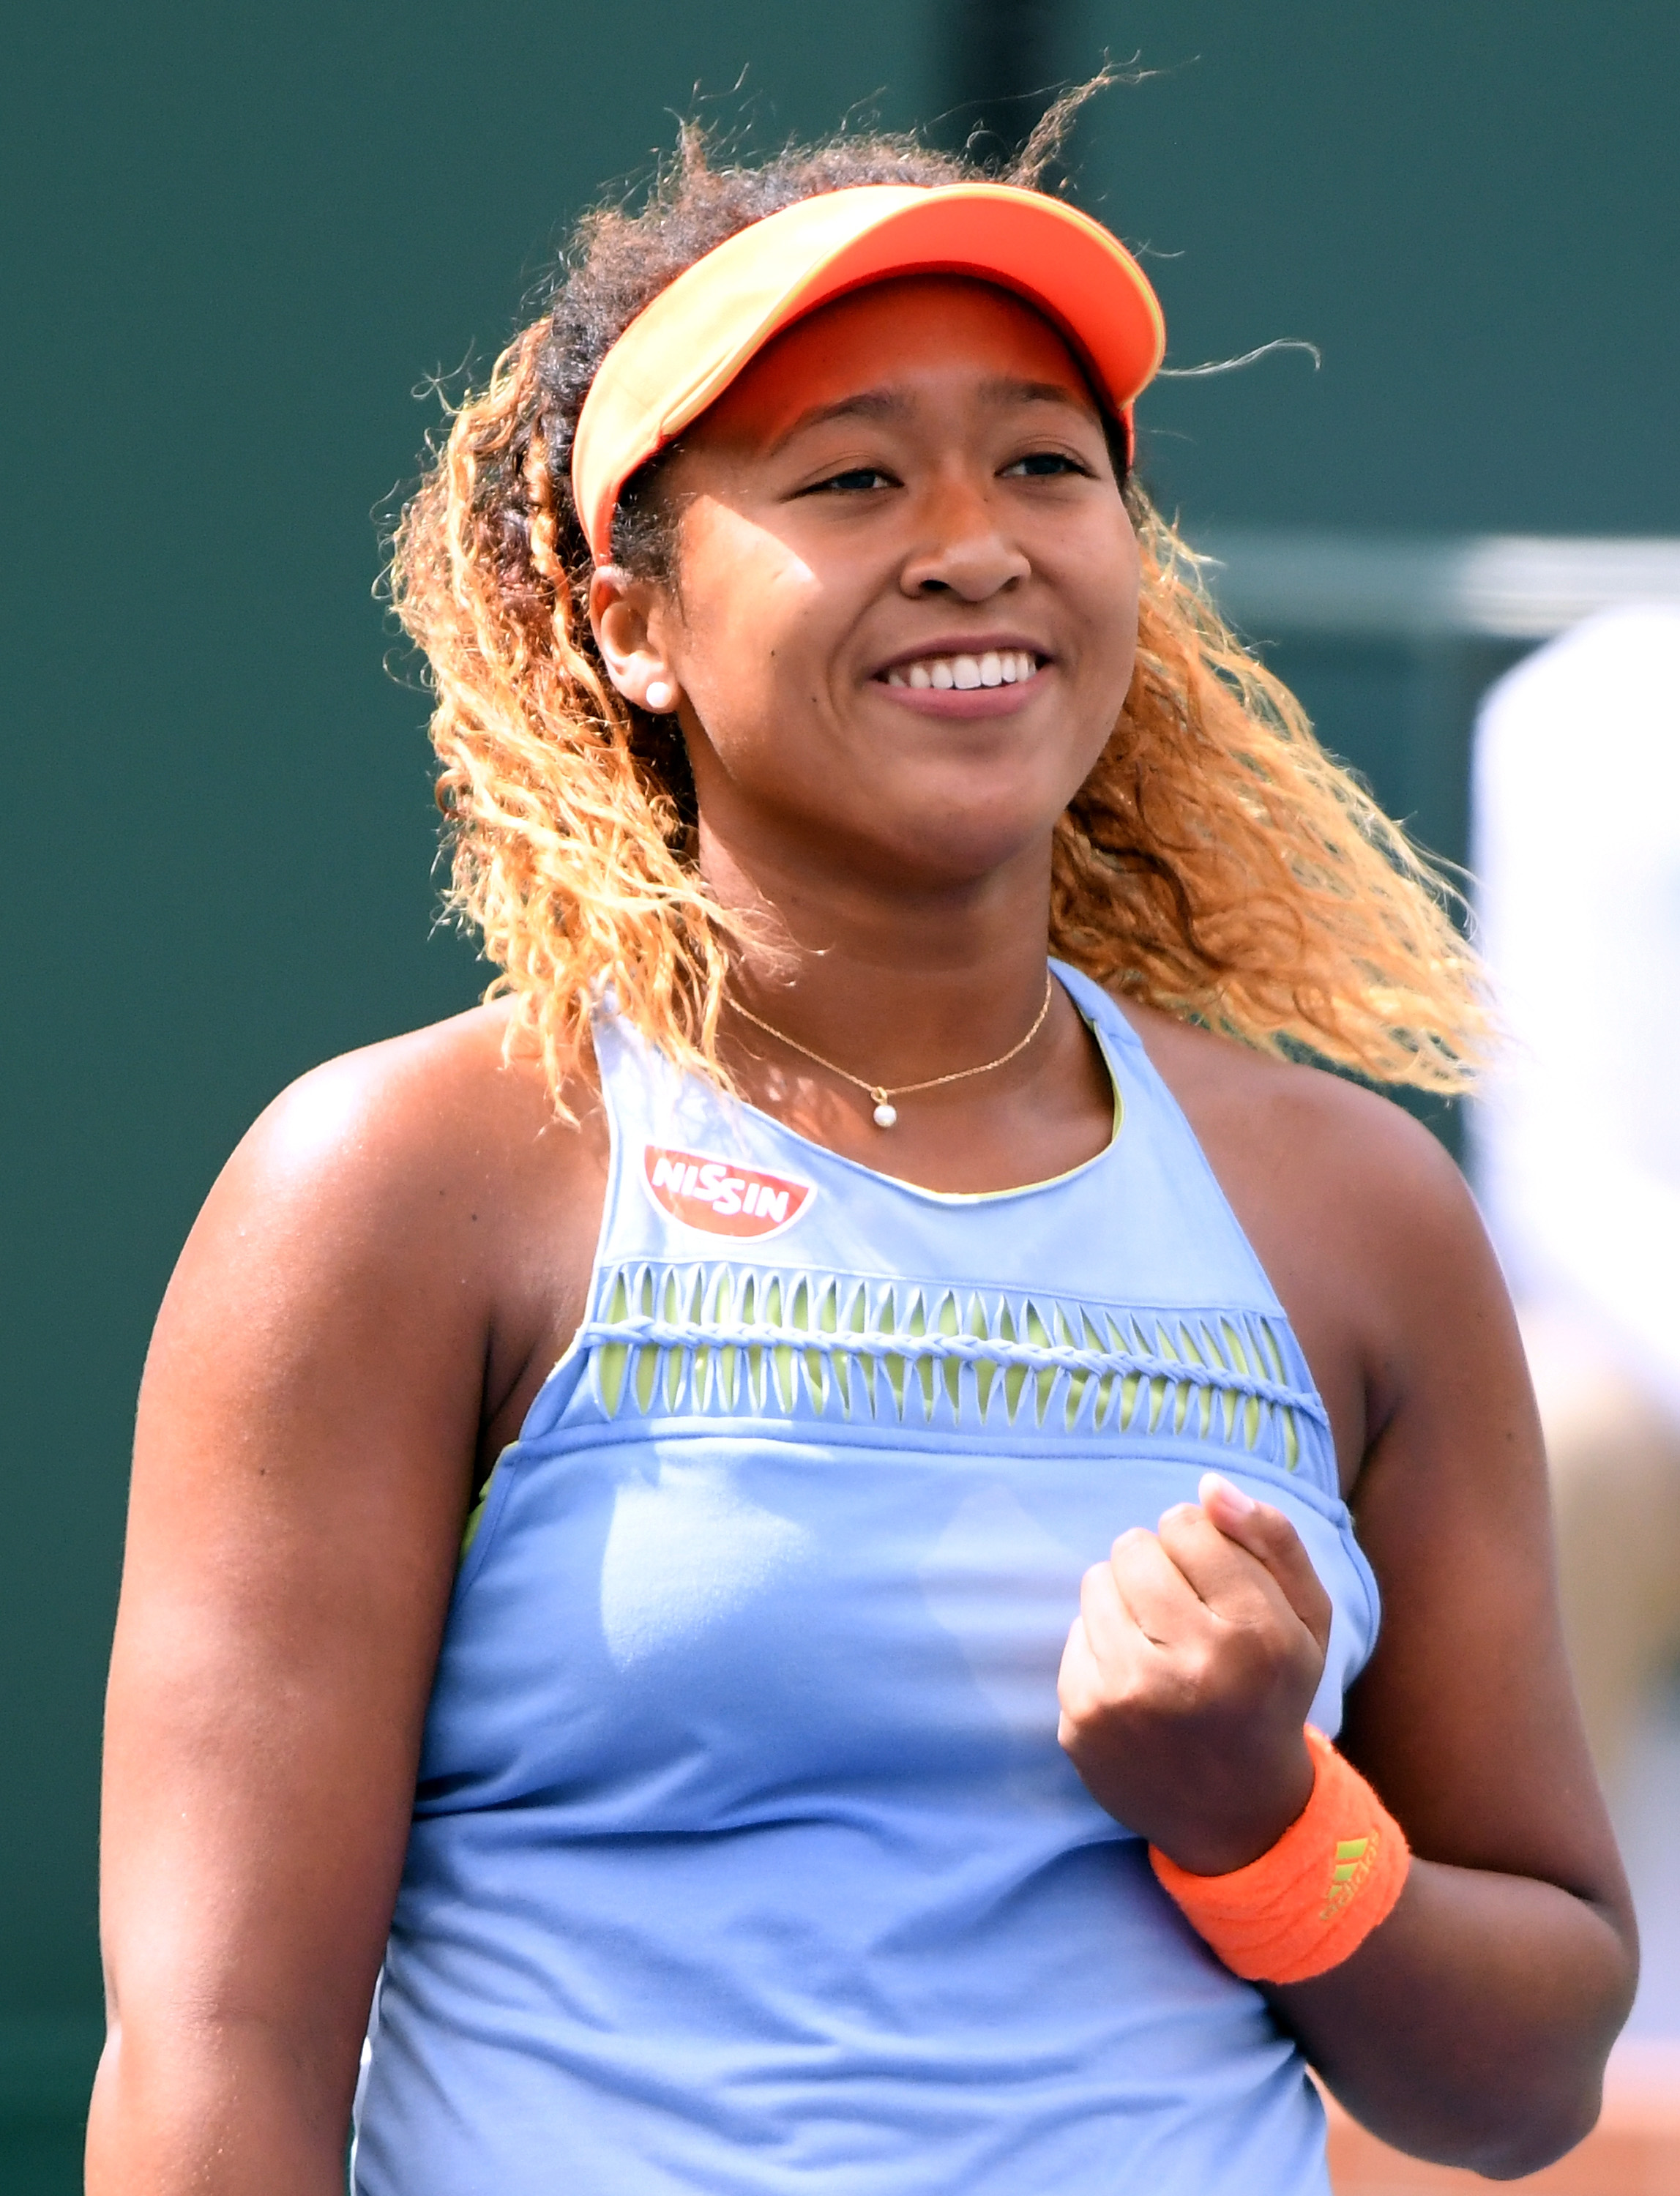 Naomi Osaka of Japan celebrates a match point in the WTA final over Daria Kasatkina of Russia during the BNP Paribas Open on March 18, 2018 in Indian Wells, California. (Harry How—Getty Images)